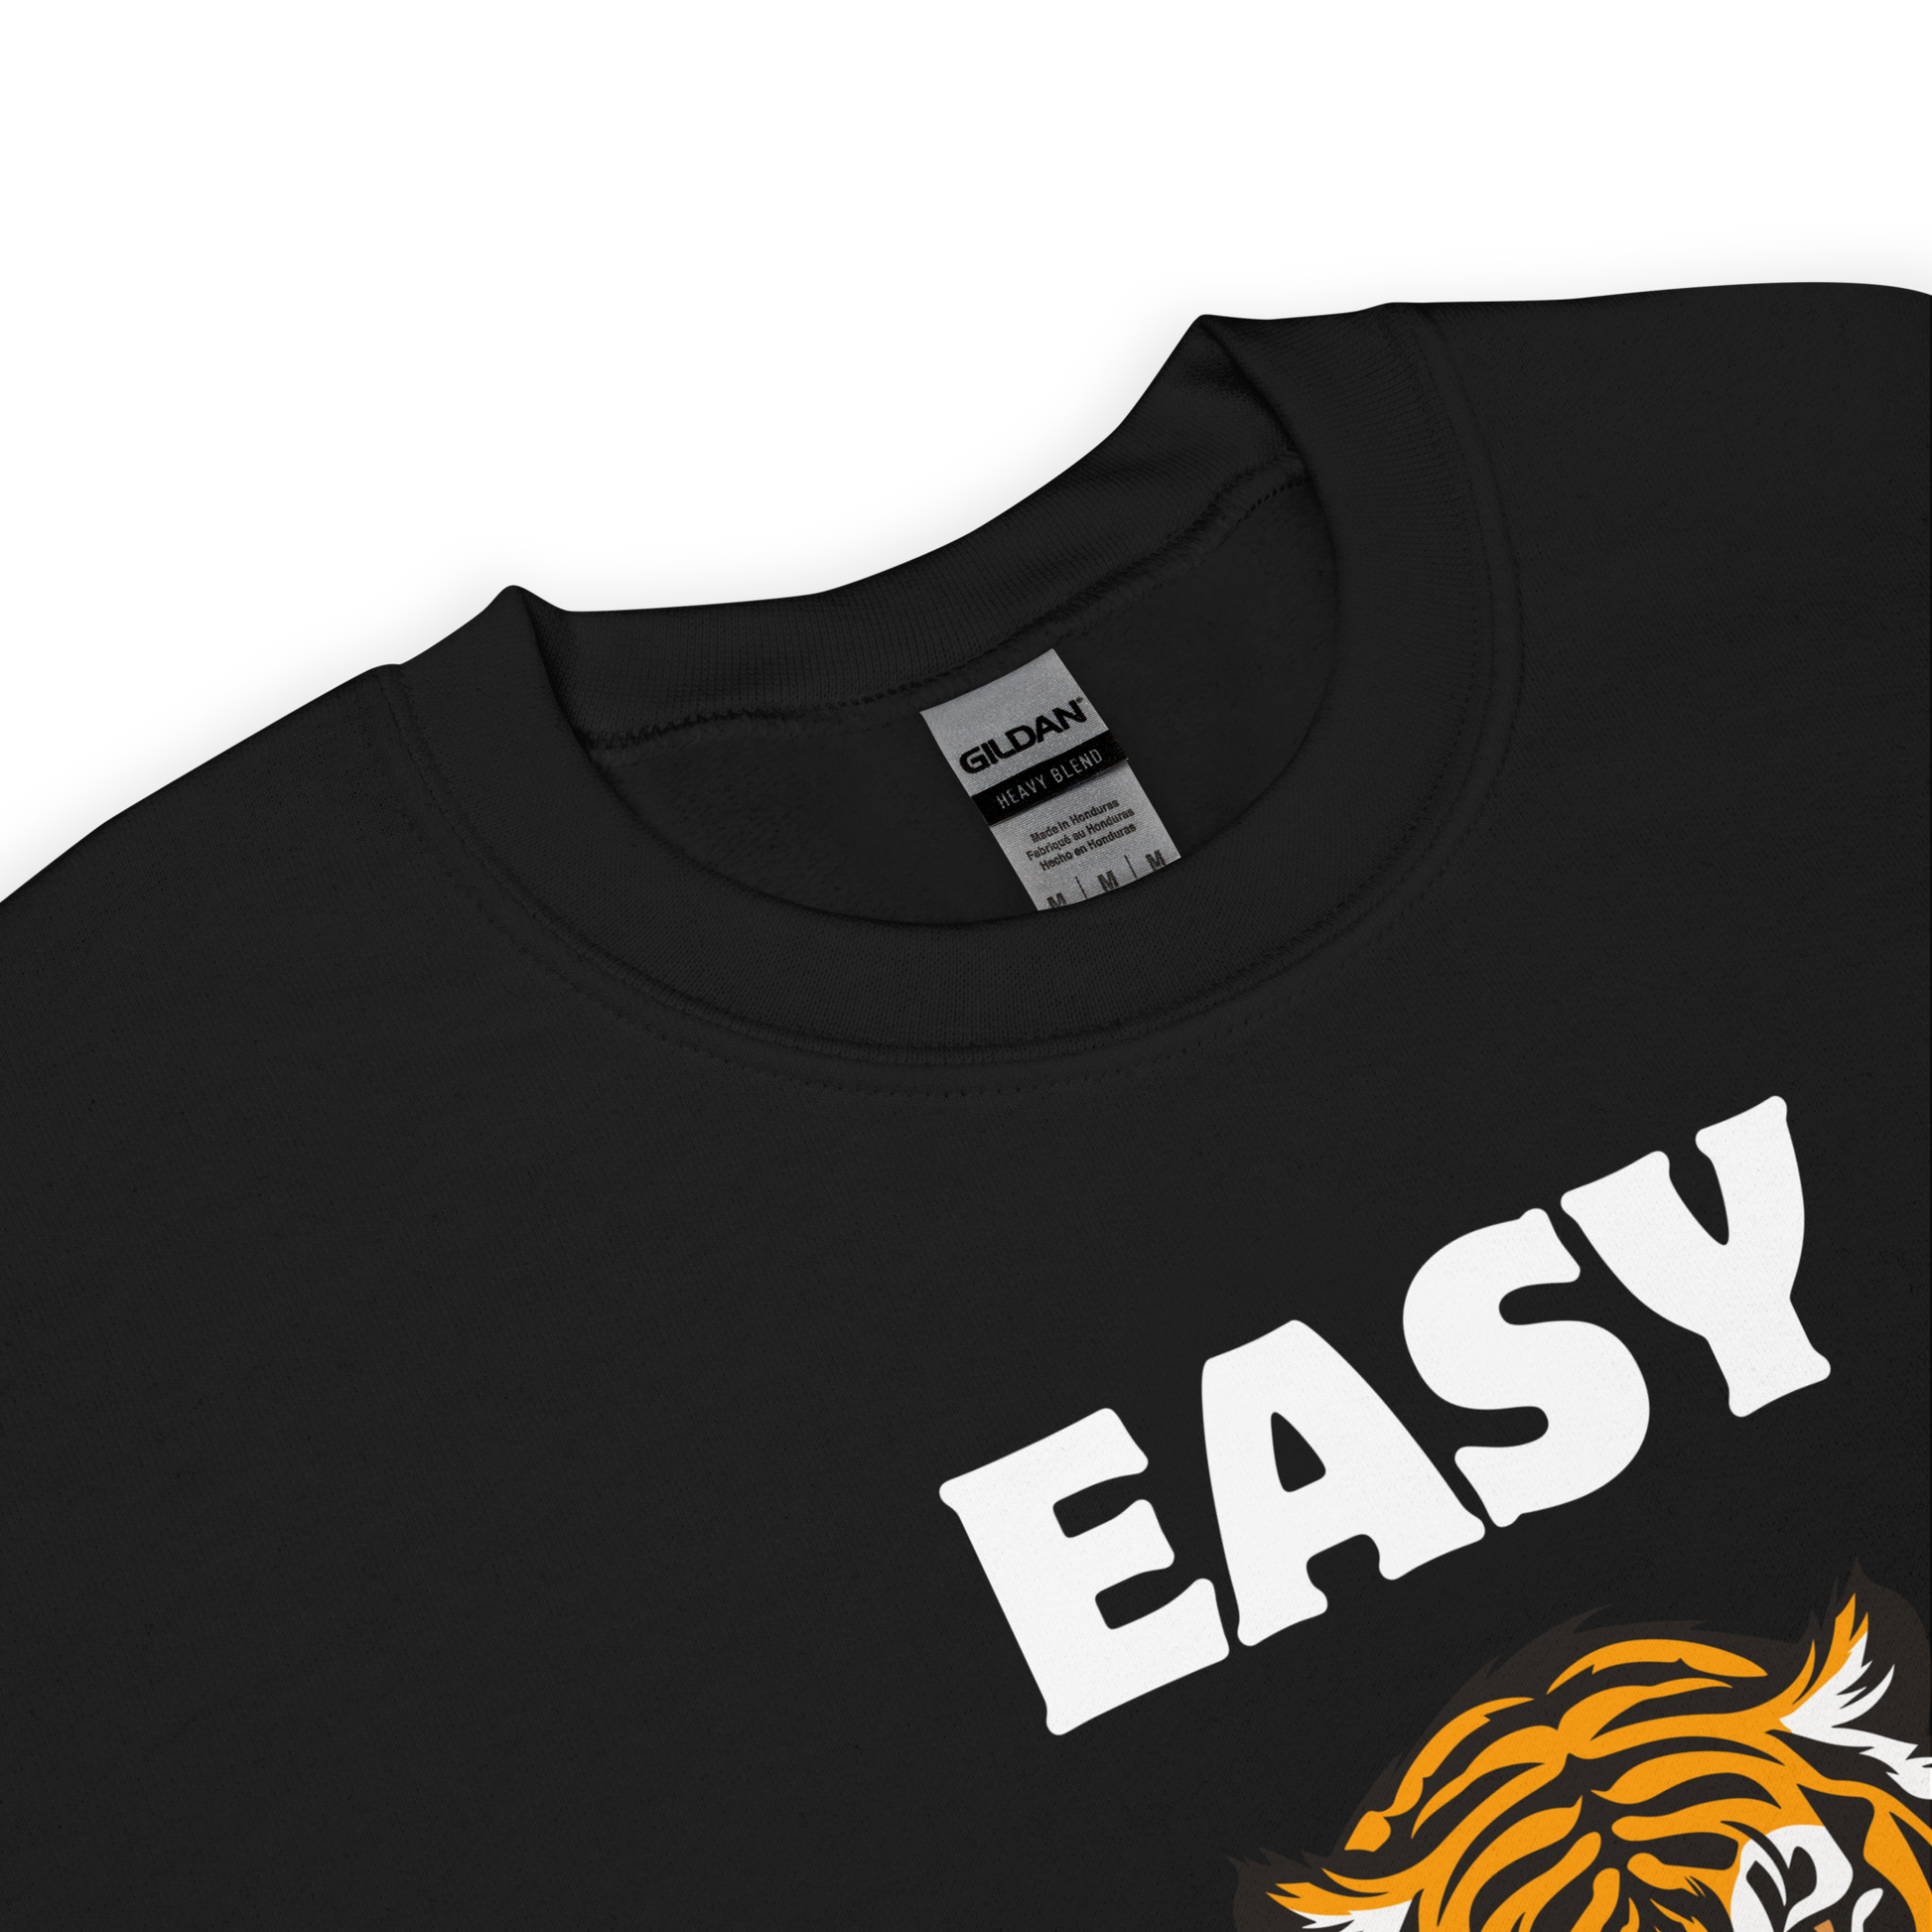 Front details of a Black Tiger Sweatshirt featuring a Easy Tiger graphic on the chest - Funny Graphic Tiger Sweatshirts - Boozy Fox